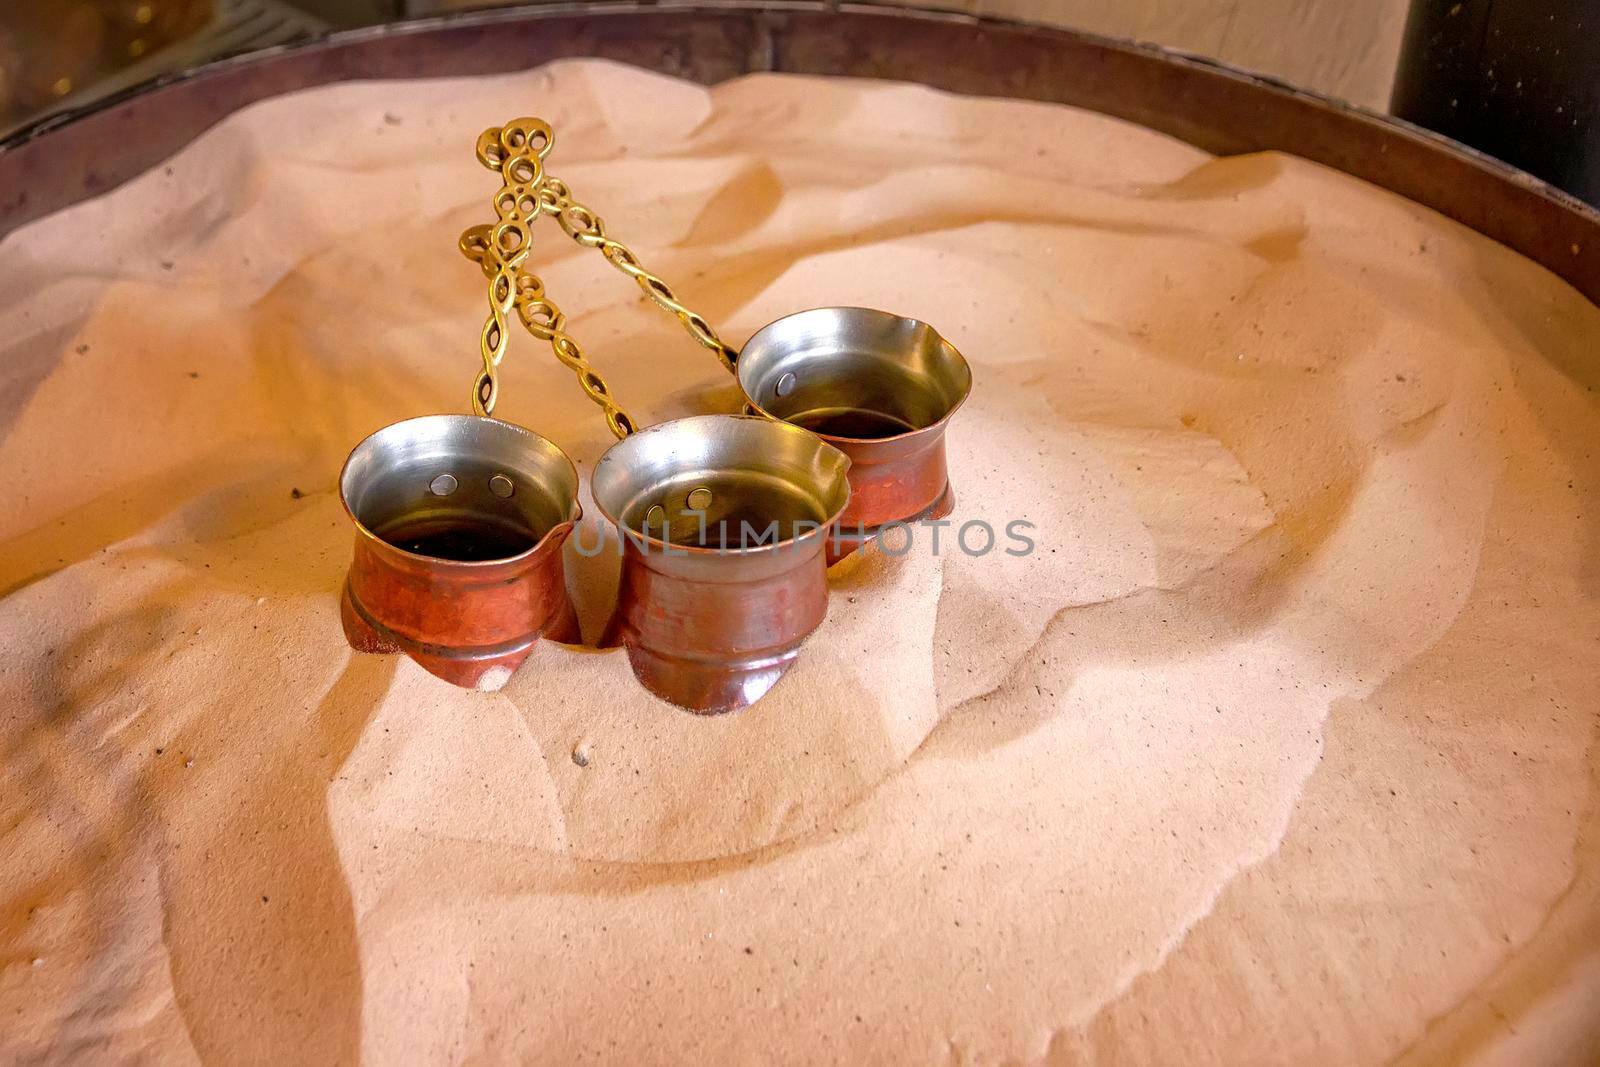 Turkish coffee is made in a traditional way. The copper coffee pots on the hot sand